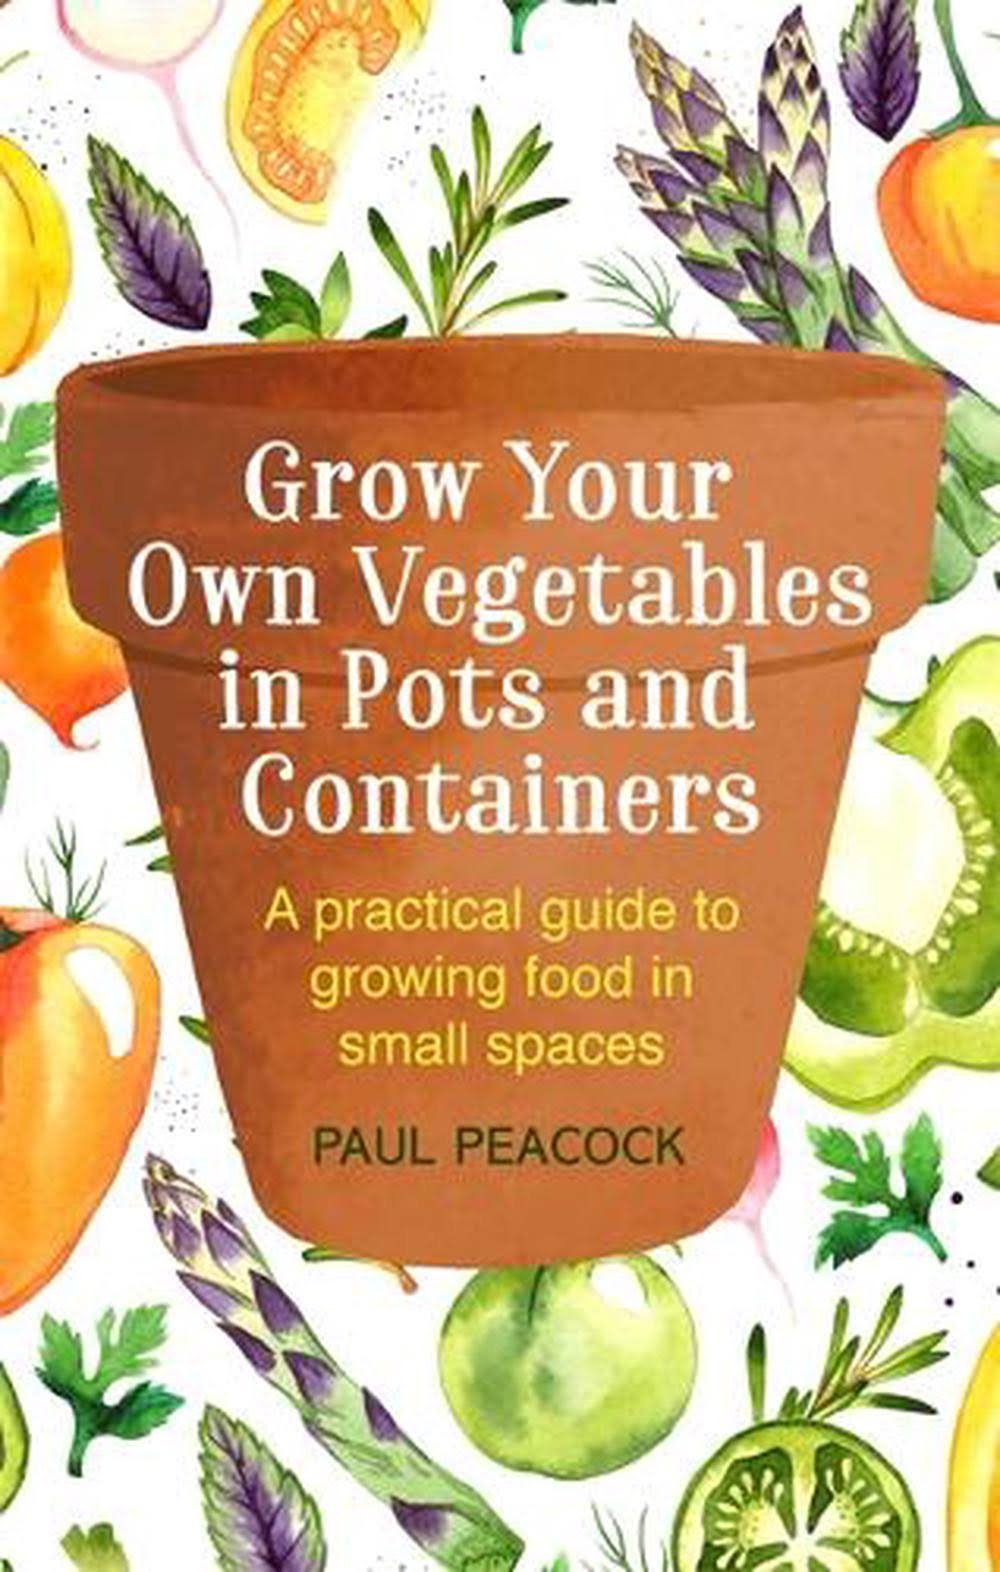 Grow Your Own Vegetables in Pots and Containers: A Practical Guide to Growing Food in Small Spaces [Book]